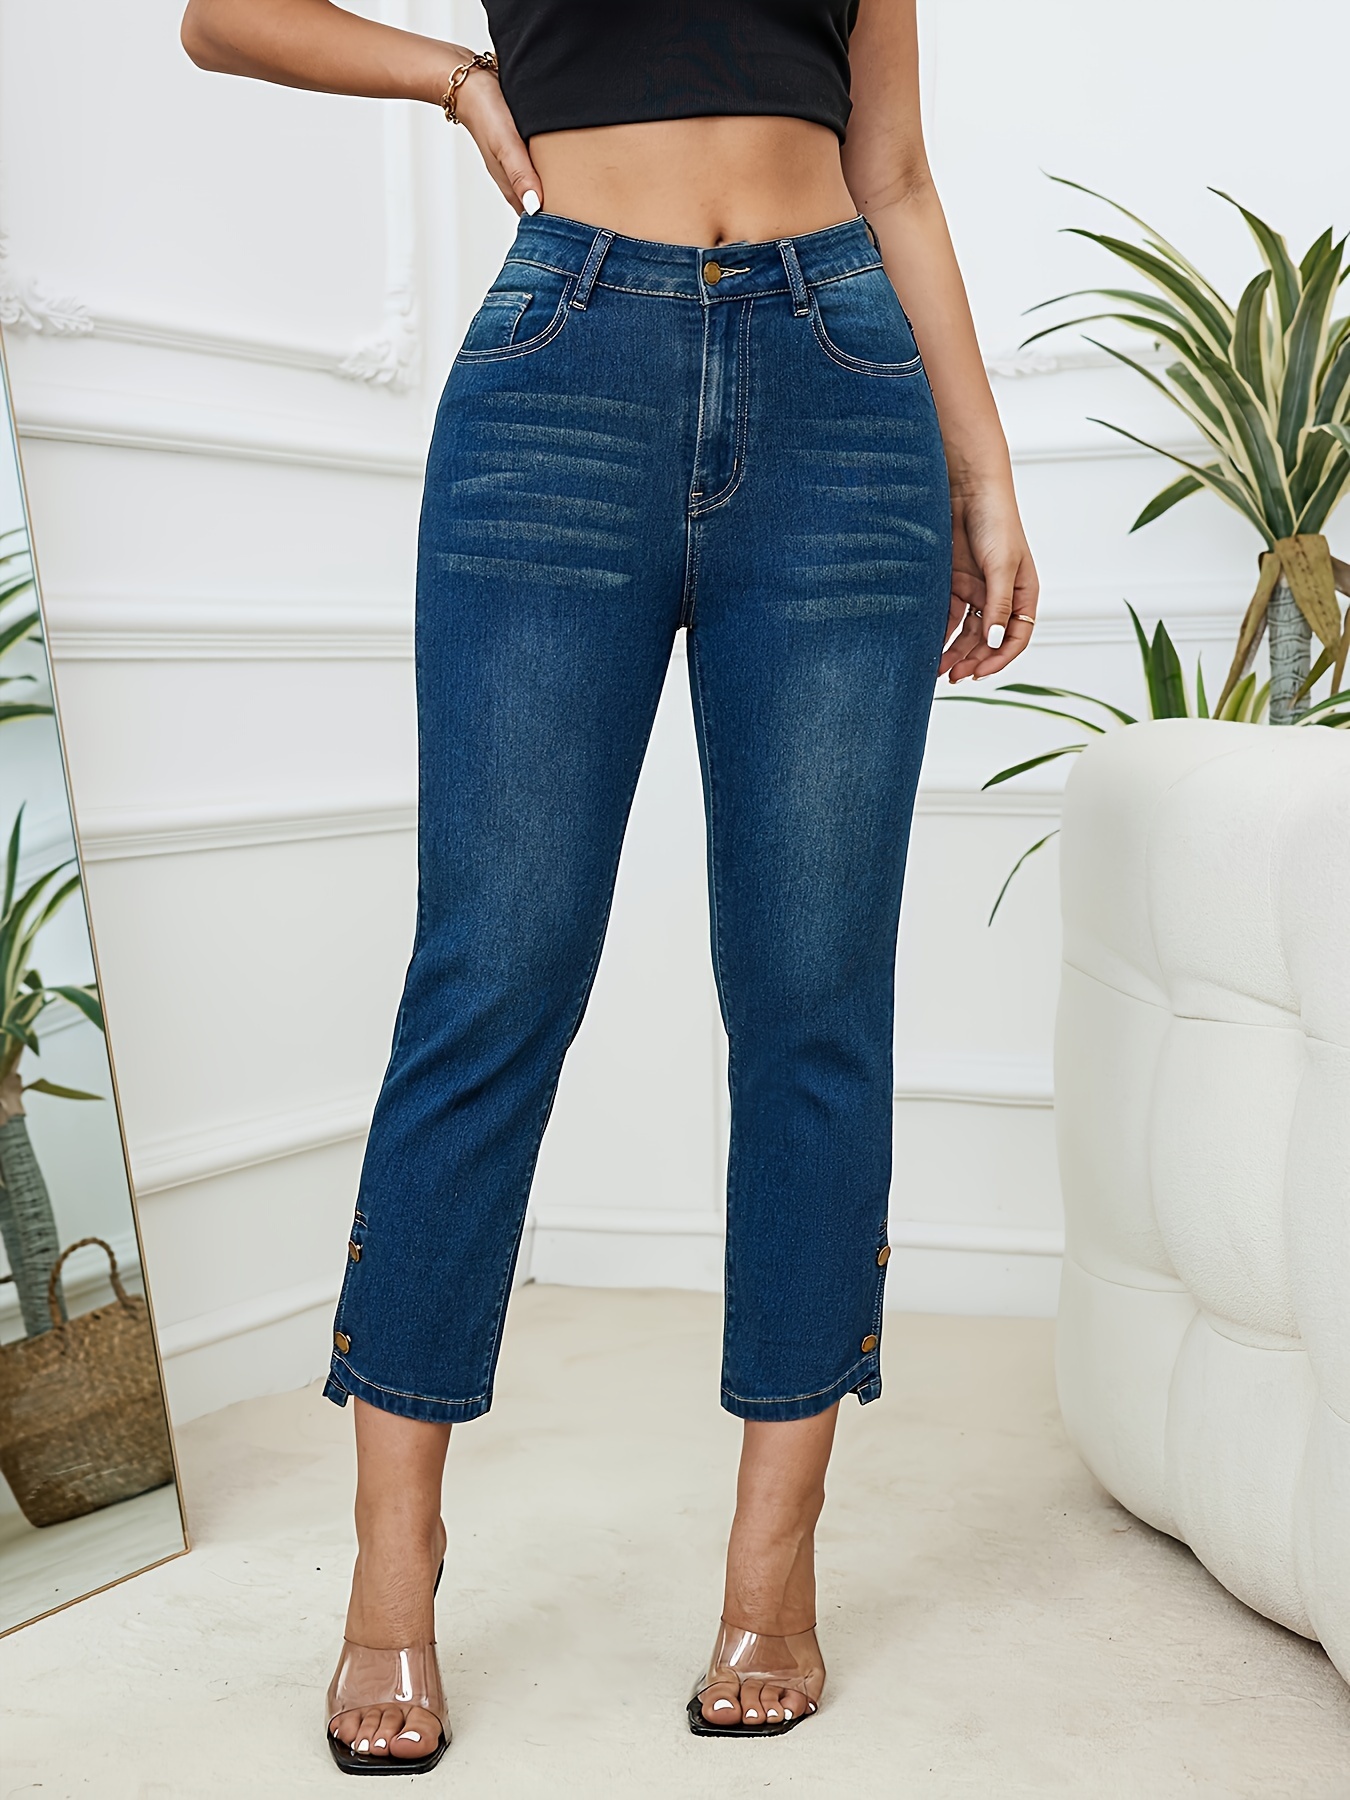 Capri Jeans for Women High Waisted Stretch Baggy Denim Pants Capris Casual  Straight Wide Leg Flared Cropped Jeans